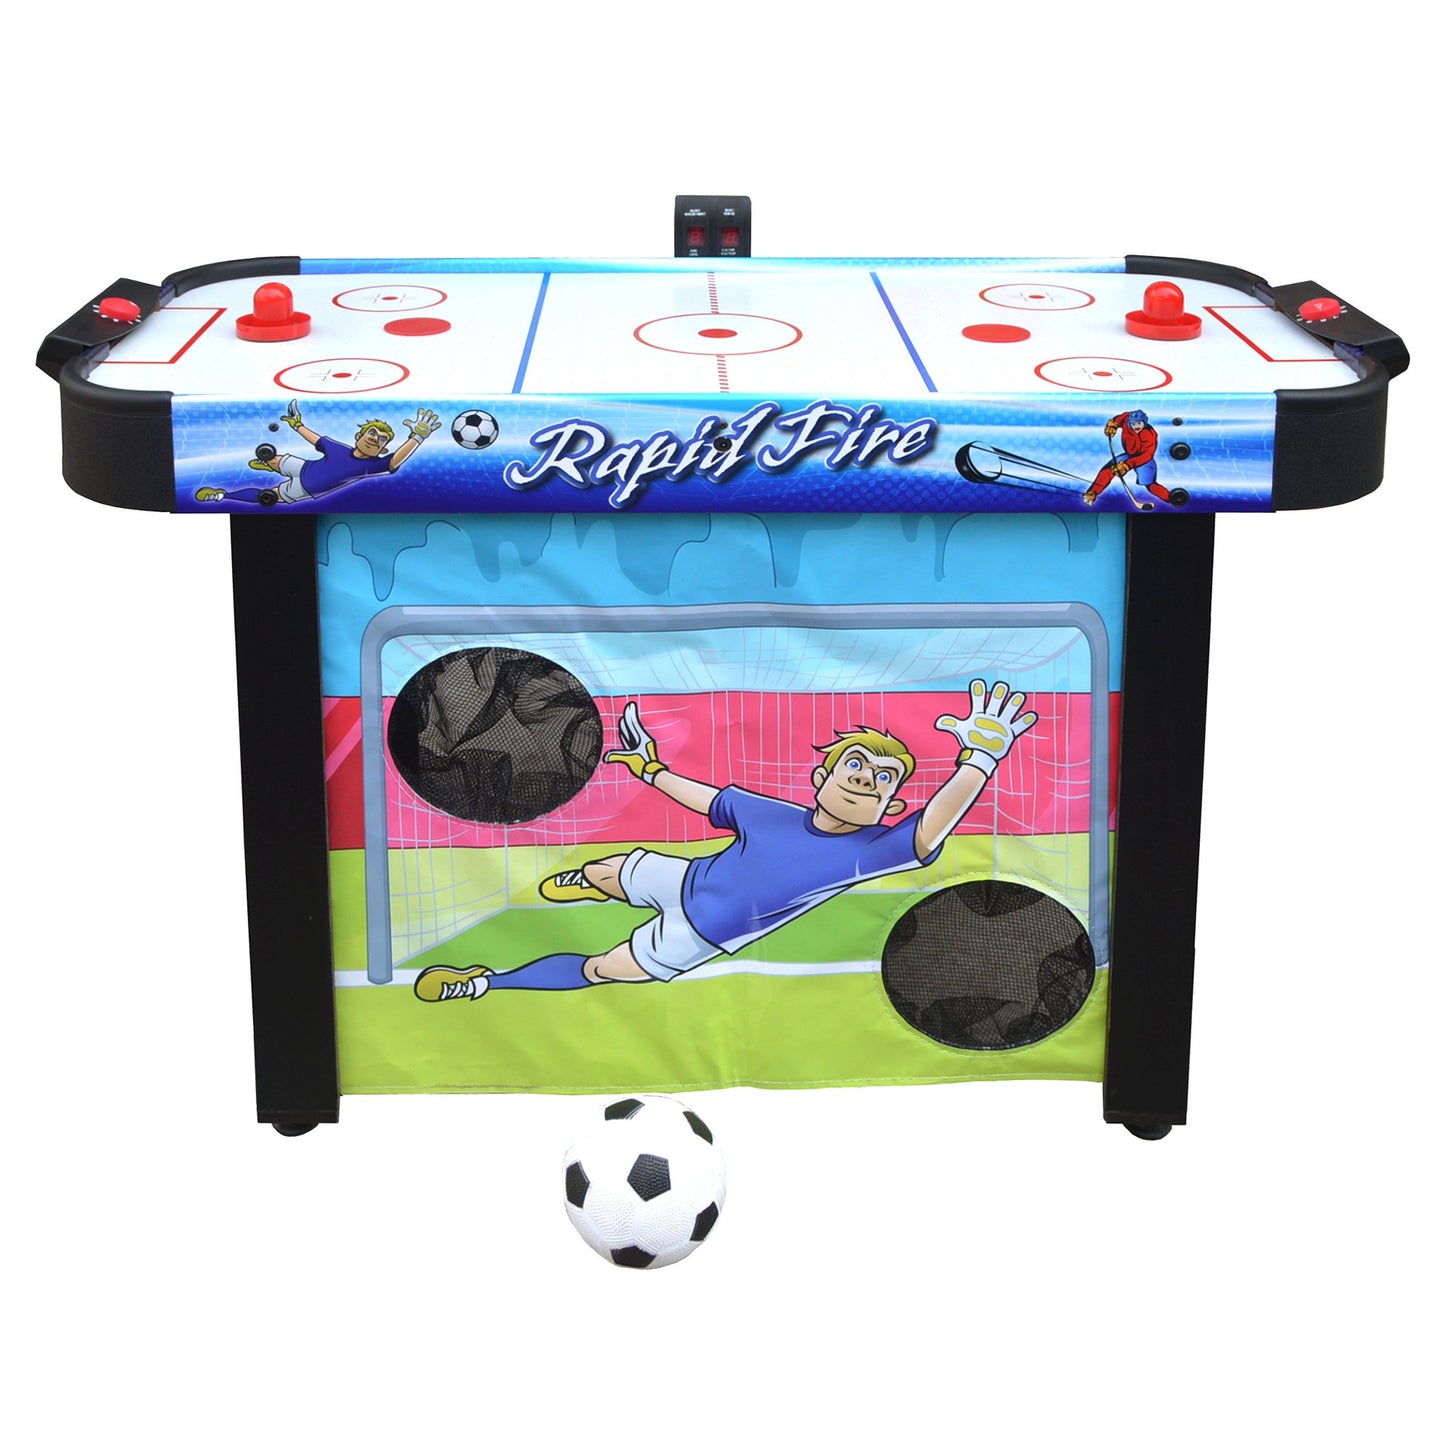 Hathaway Rapid Fire 3 in 1 Air Hockey Multi Game Table - Gaming Blaze